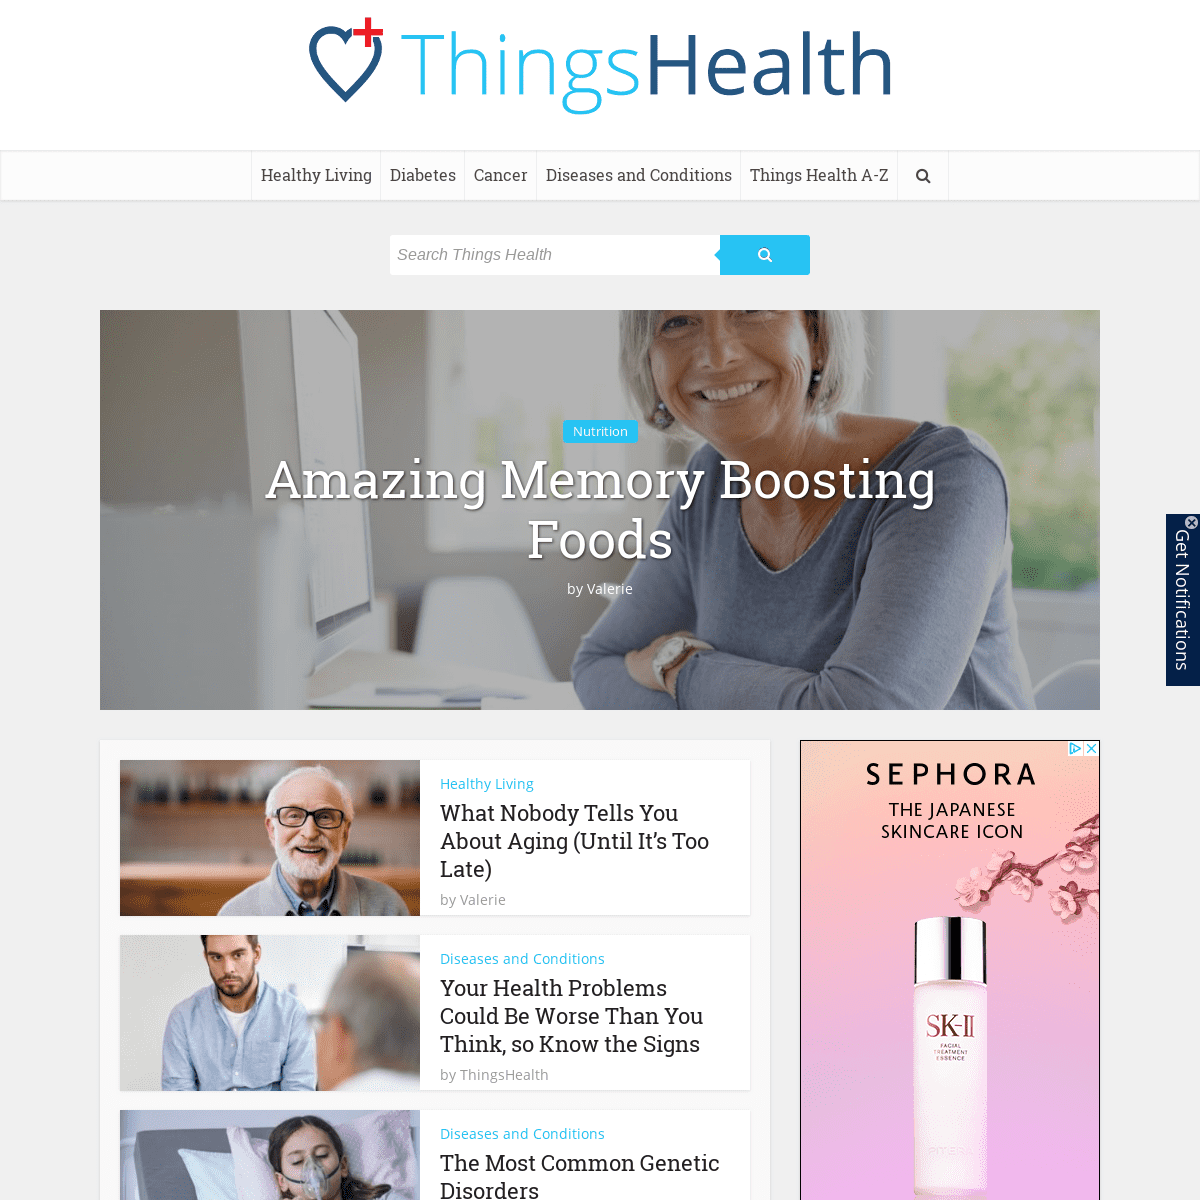 Things Health | Health And Wellness Information – Signs, Symptoms, Treatments And Advice